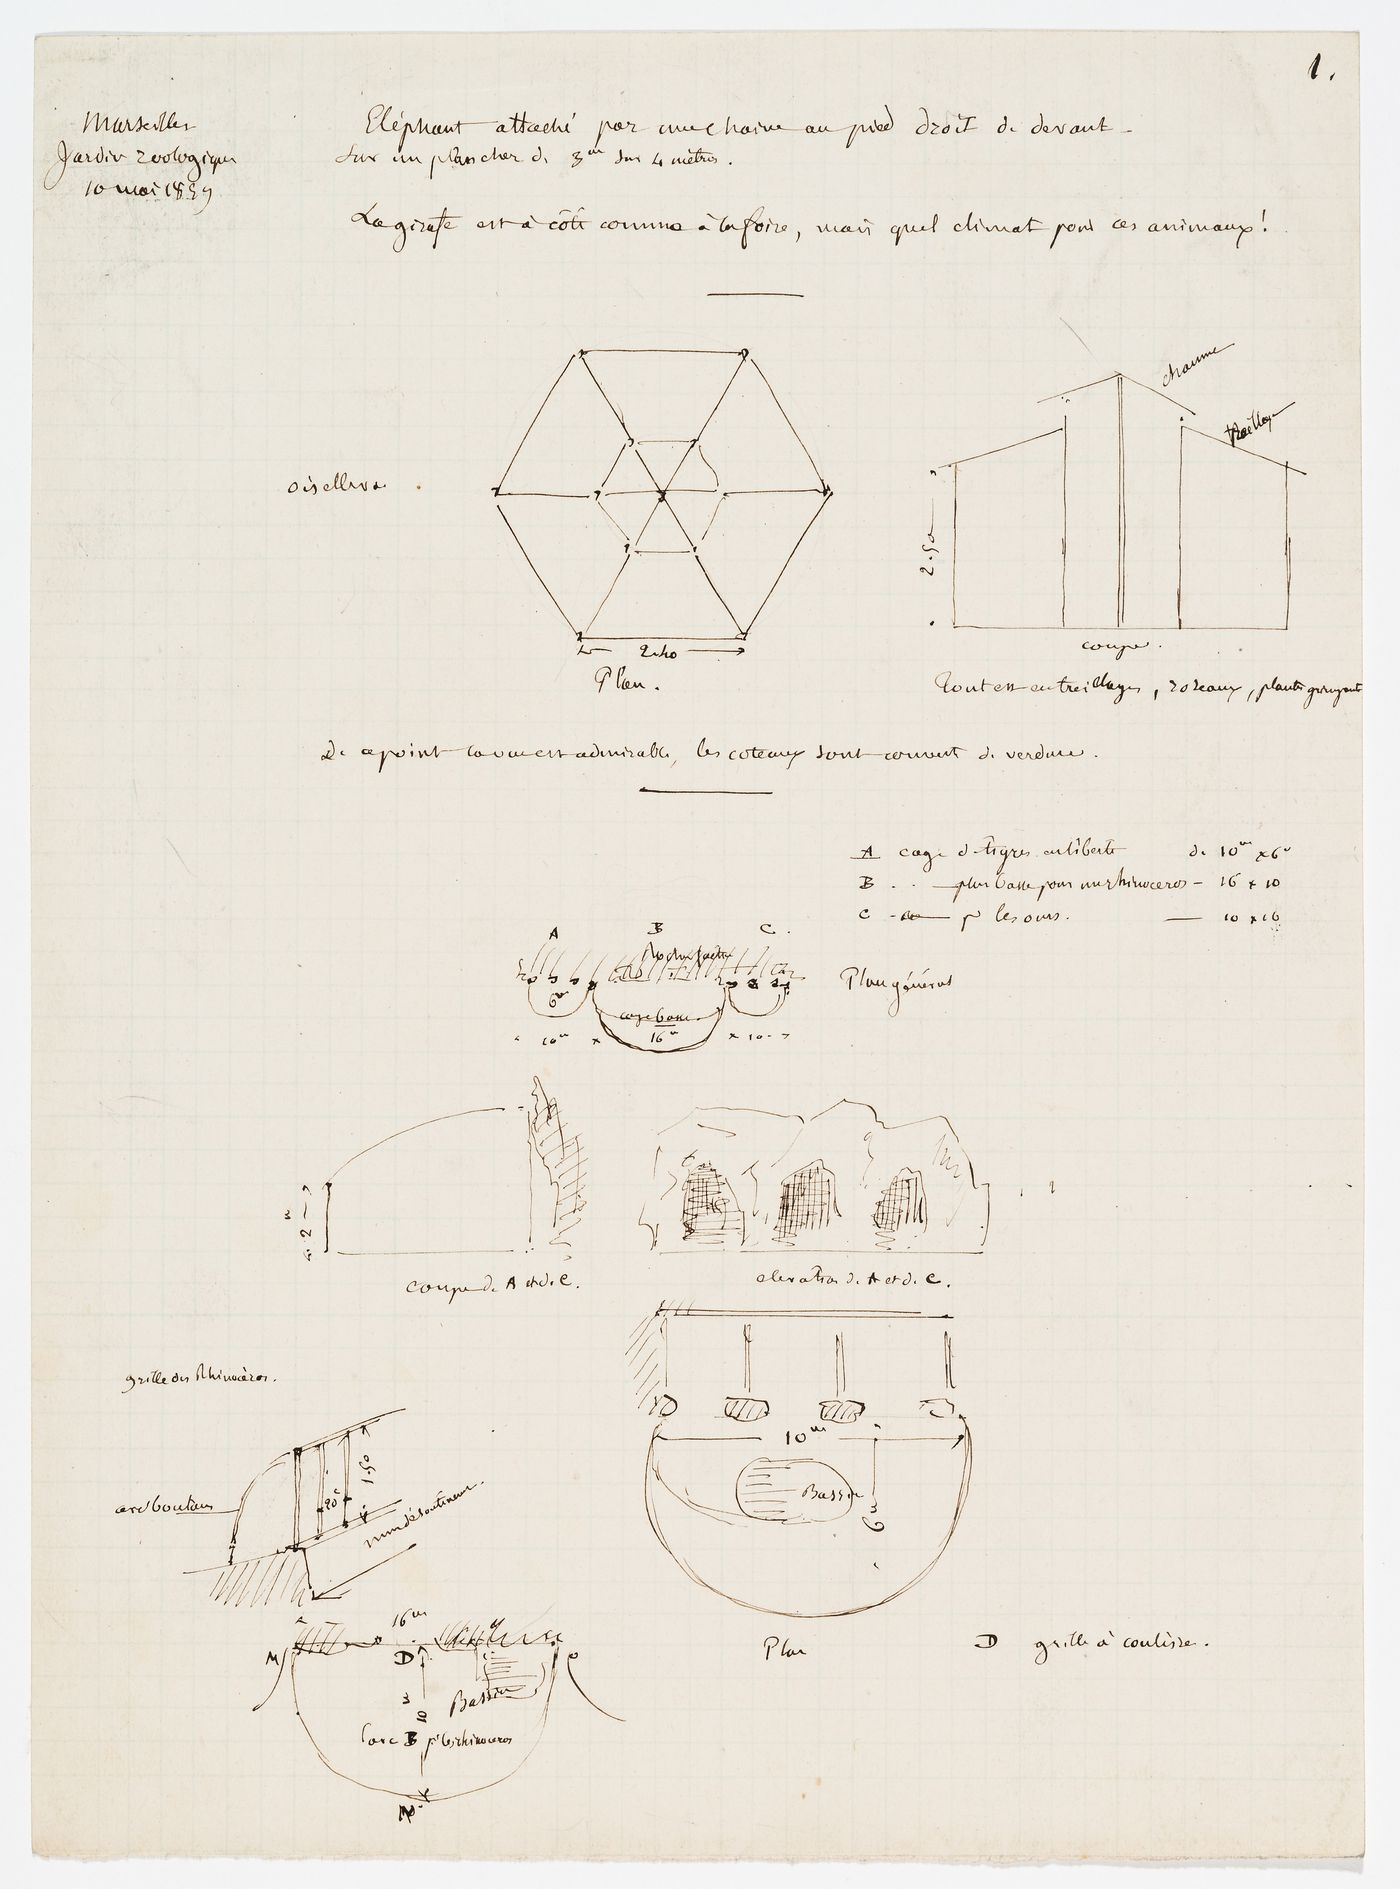 Zoological garden, Marseille: Notes and sketches concerning the animal cages